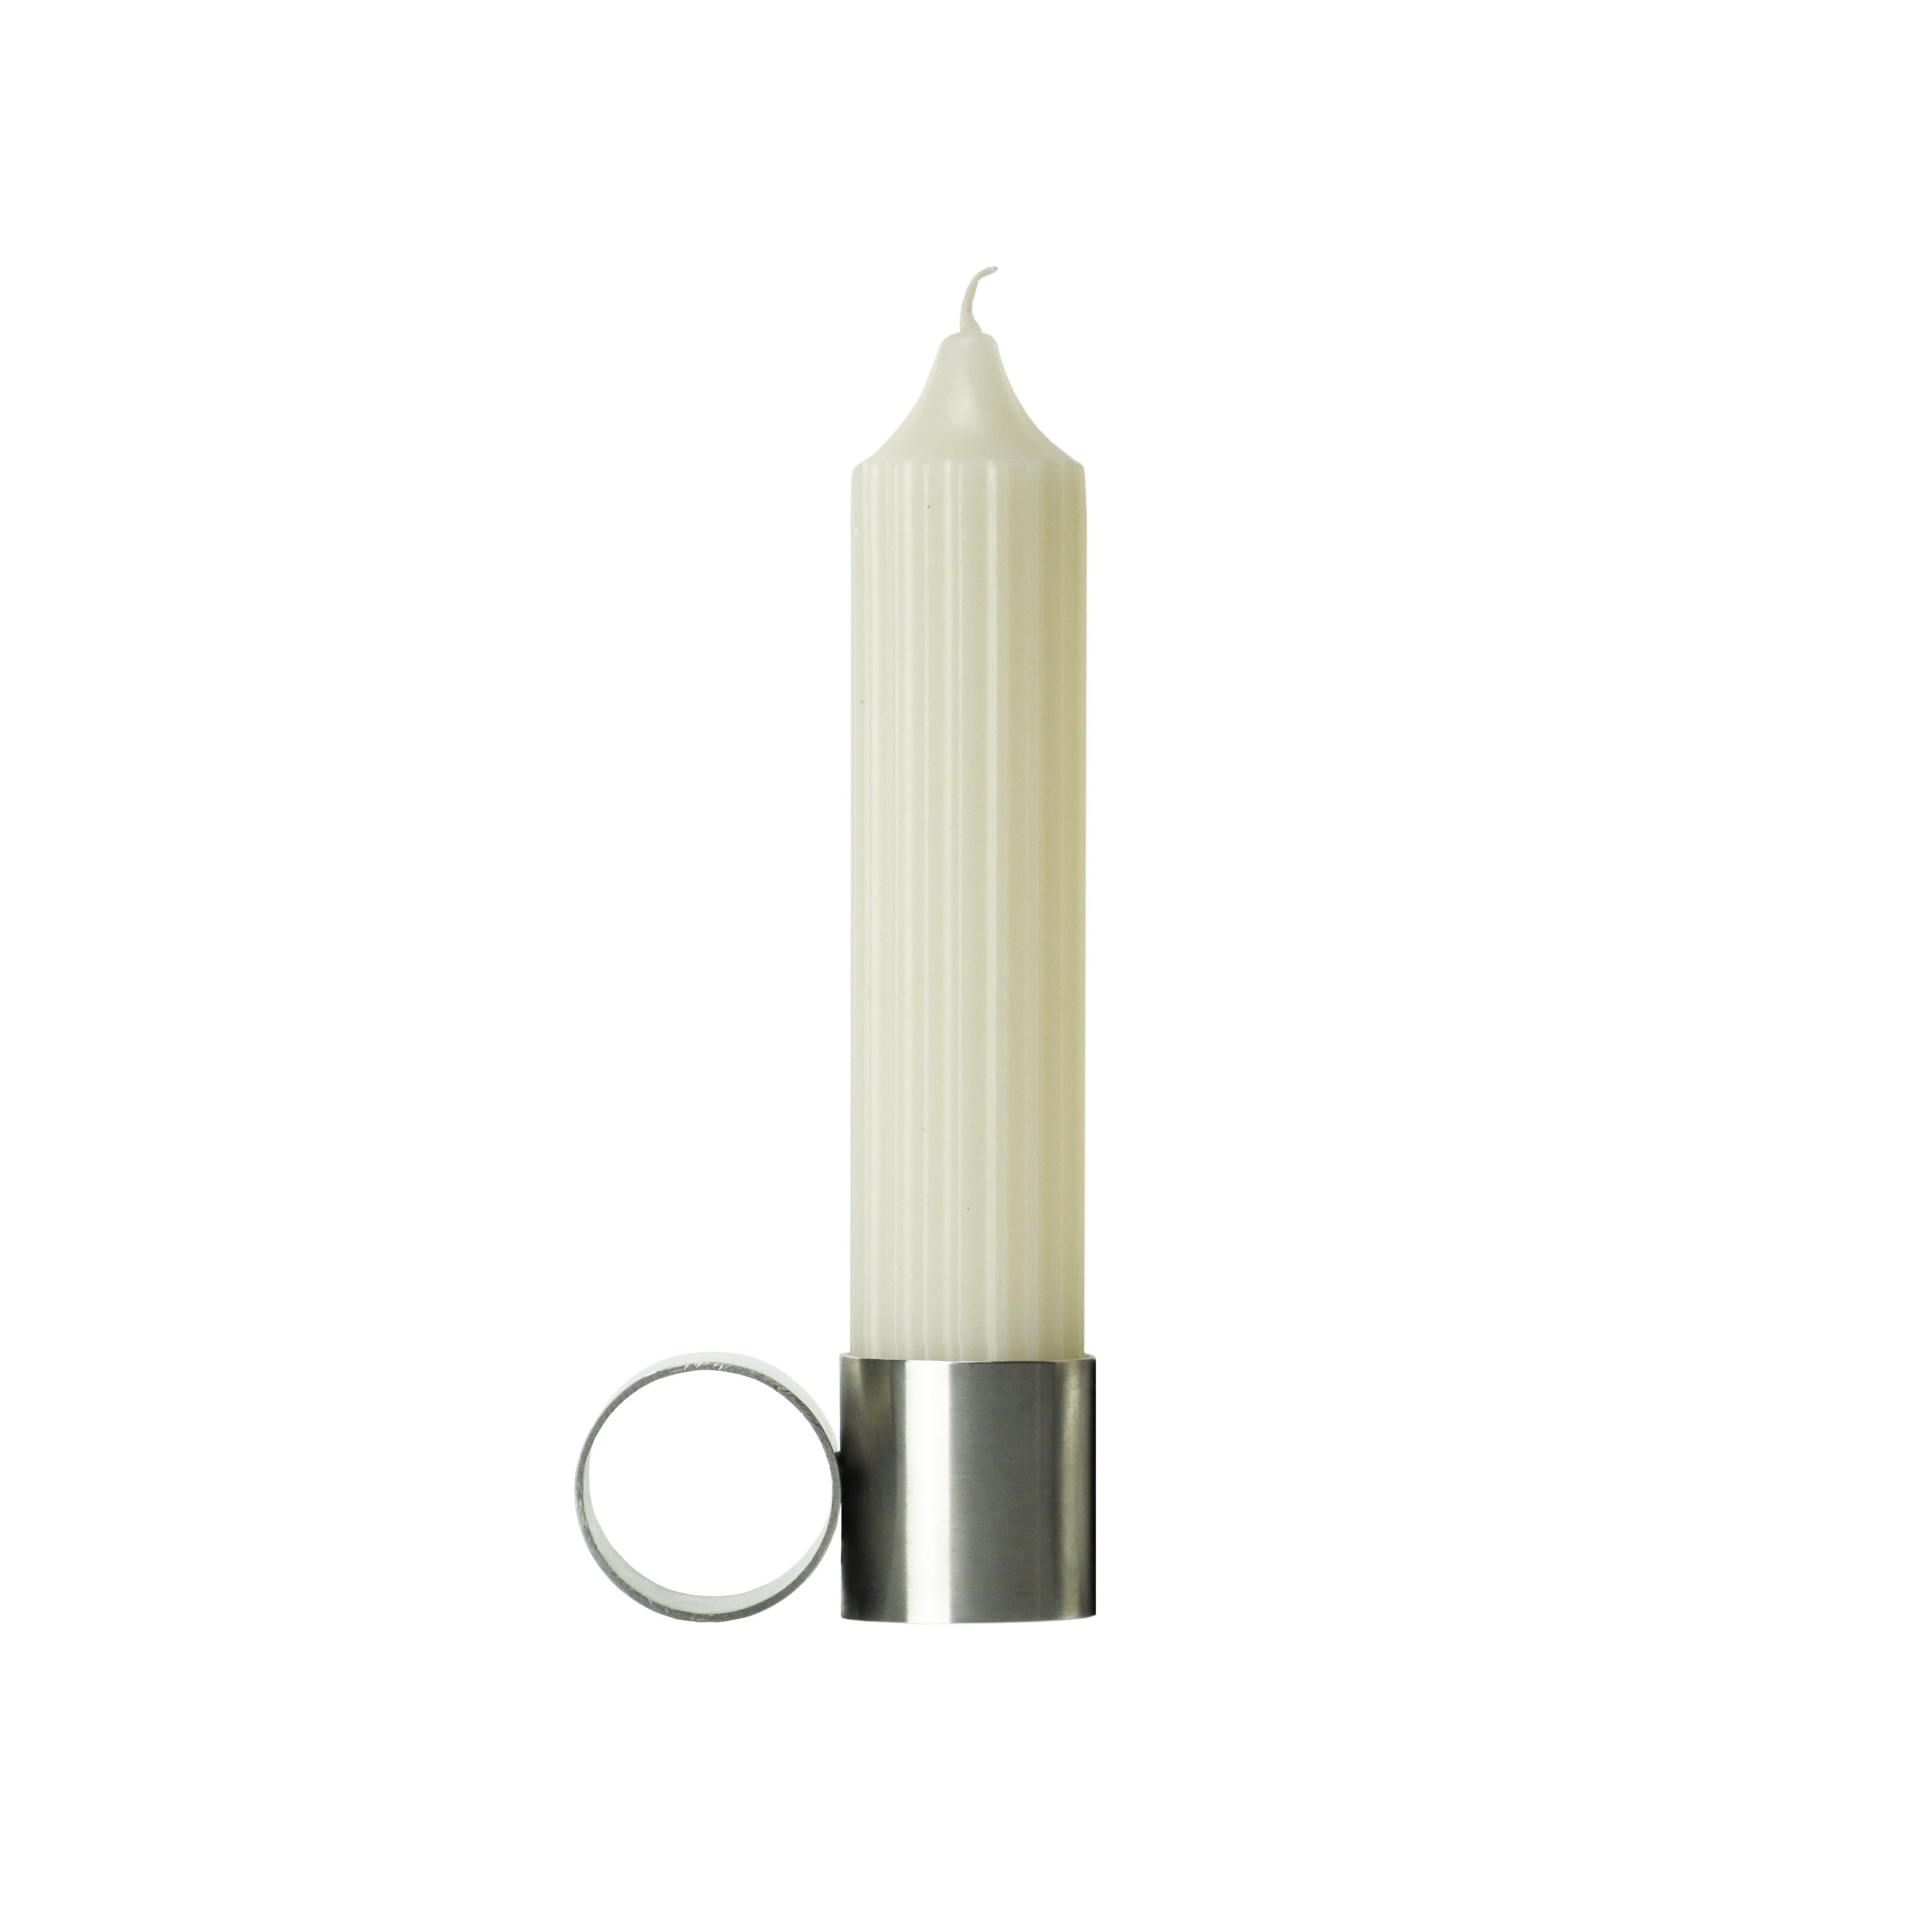 Other Tempio Del Tempo 1 Candleholder by Coki Barbieri For Sale